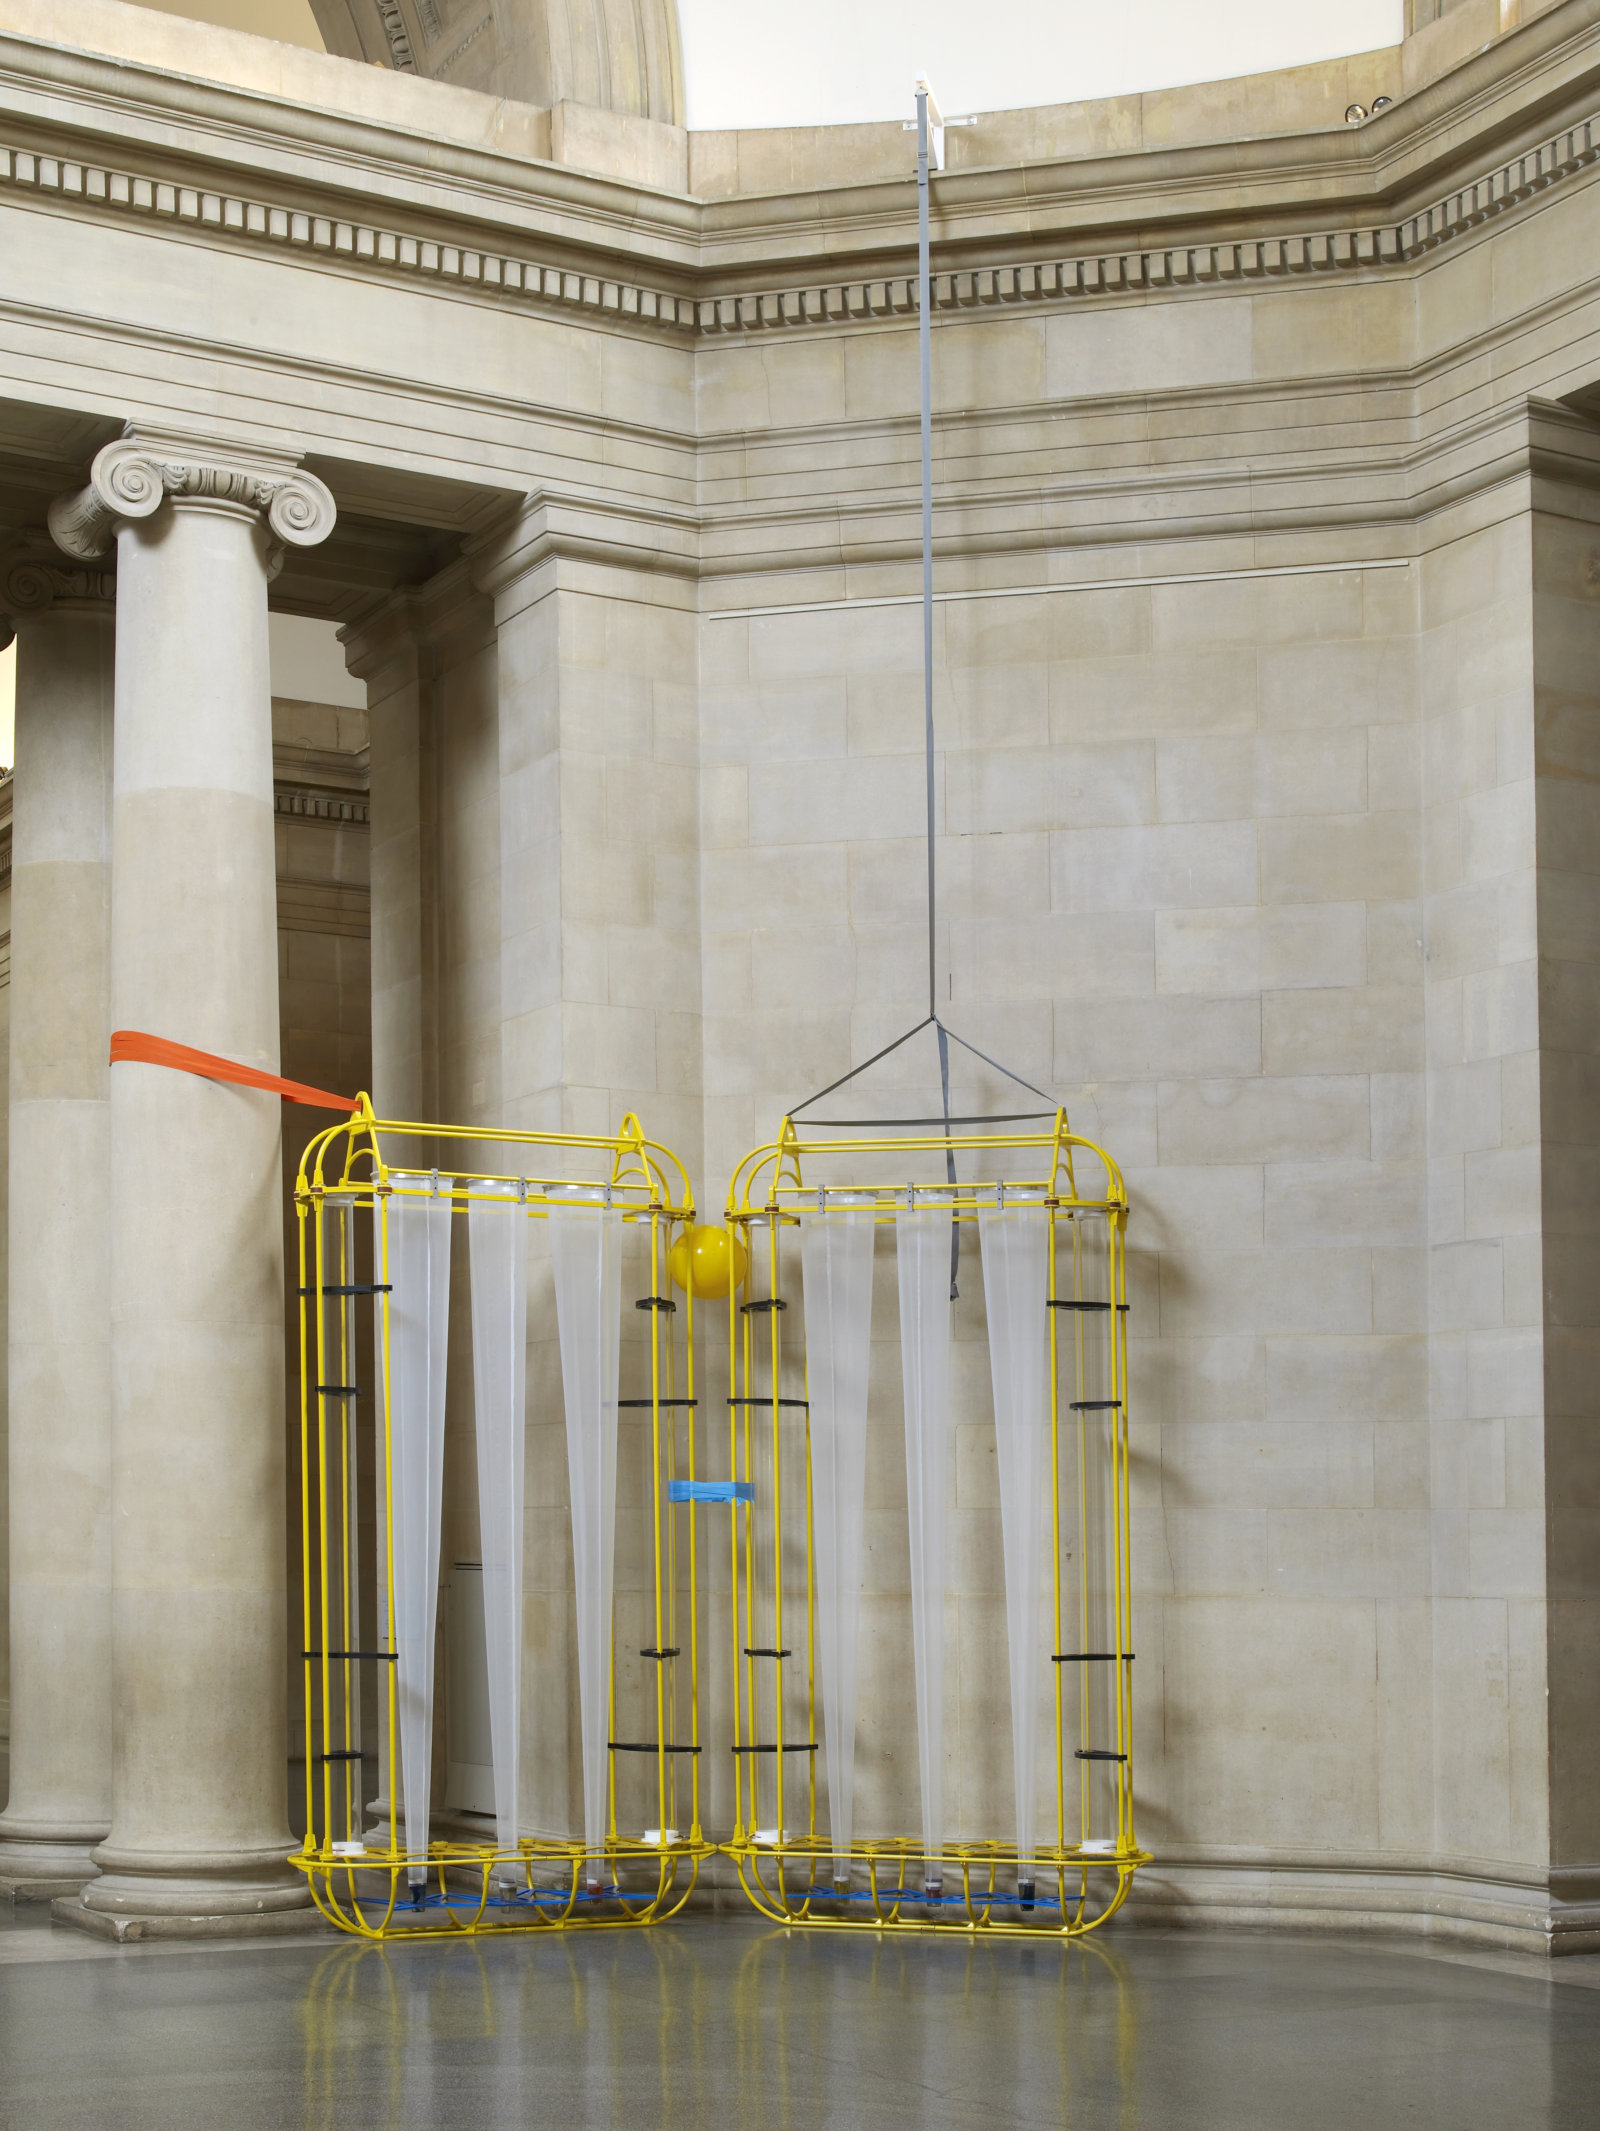 Christina Mackie, The Yellow Machines, 2015, steel, aluminum, acrylic, styrene, copper, stainless steel, nylon webbing, polyethylene, nylon, resin, rubber, 128 x 160 x 32 in. (326 x 406 x 80 cm). Installation view, the filters, Tate Britain, London, UK, 2015